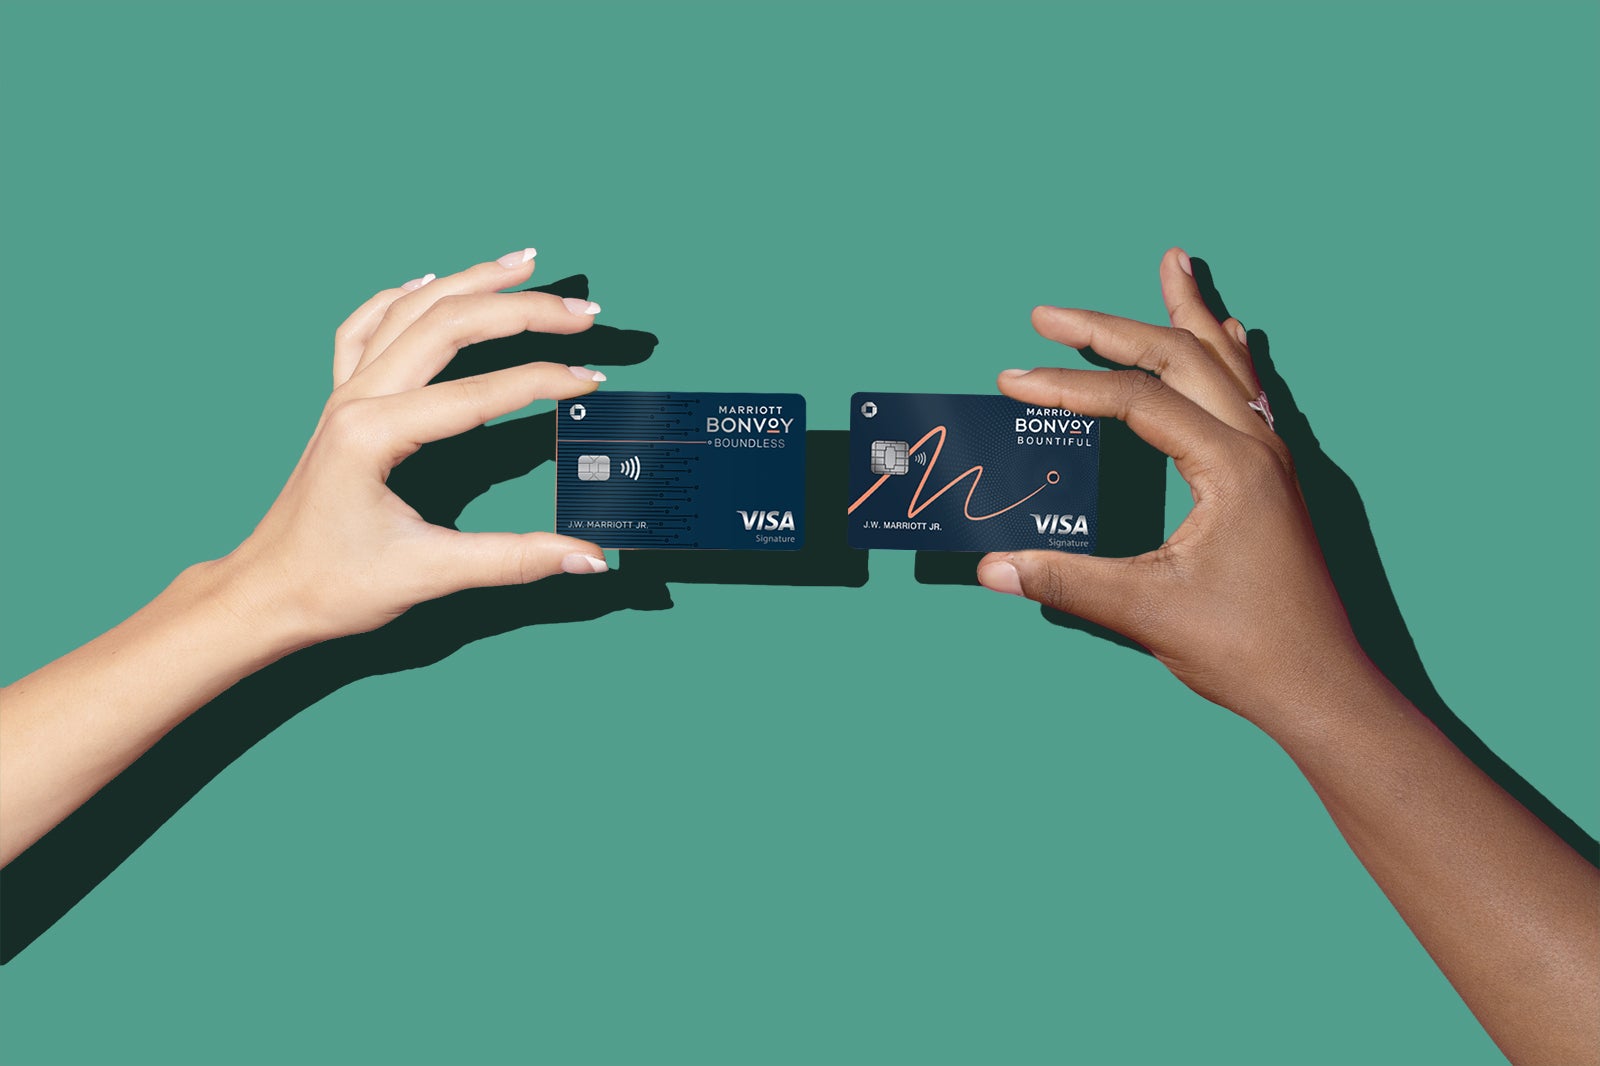 2 hands hold credit cards for a comparison